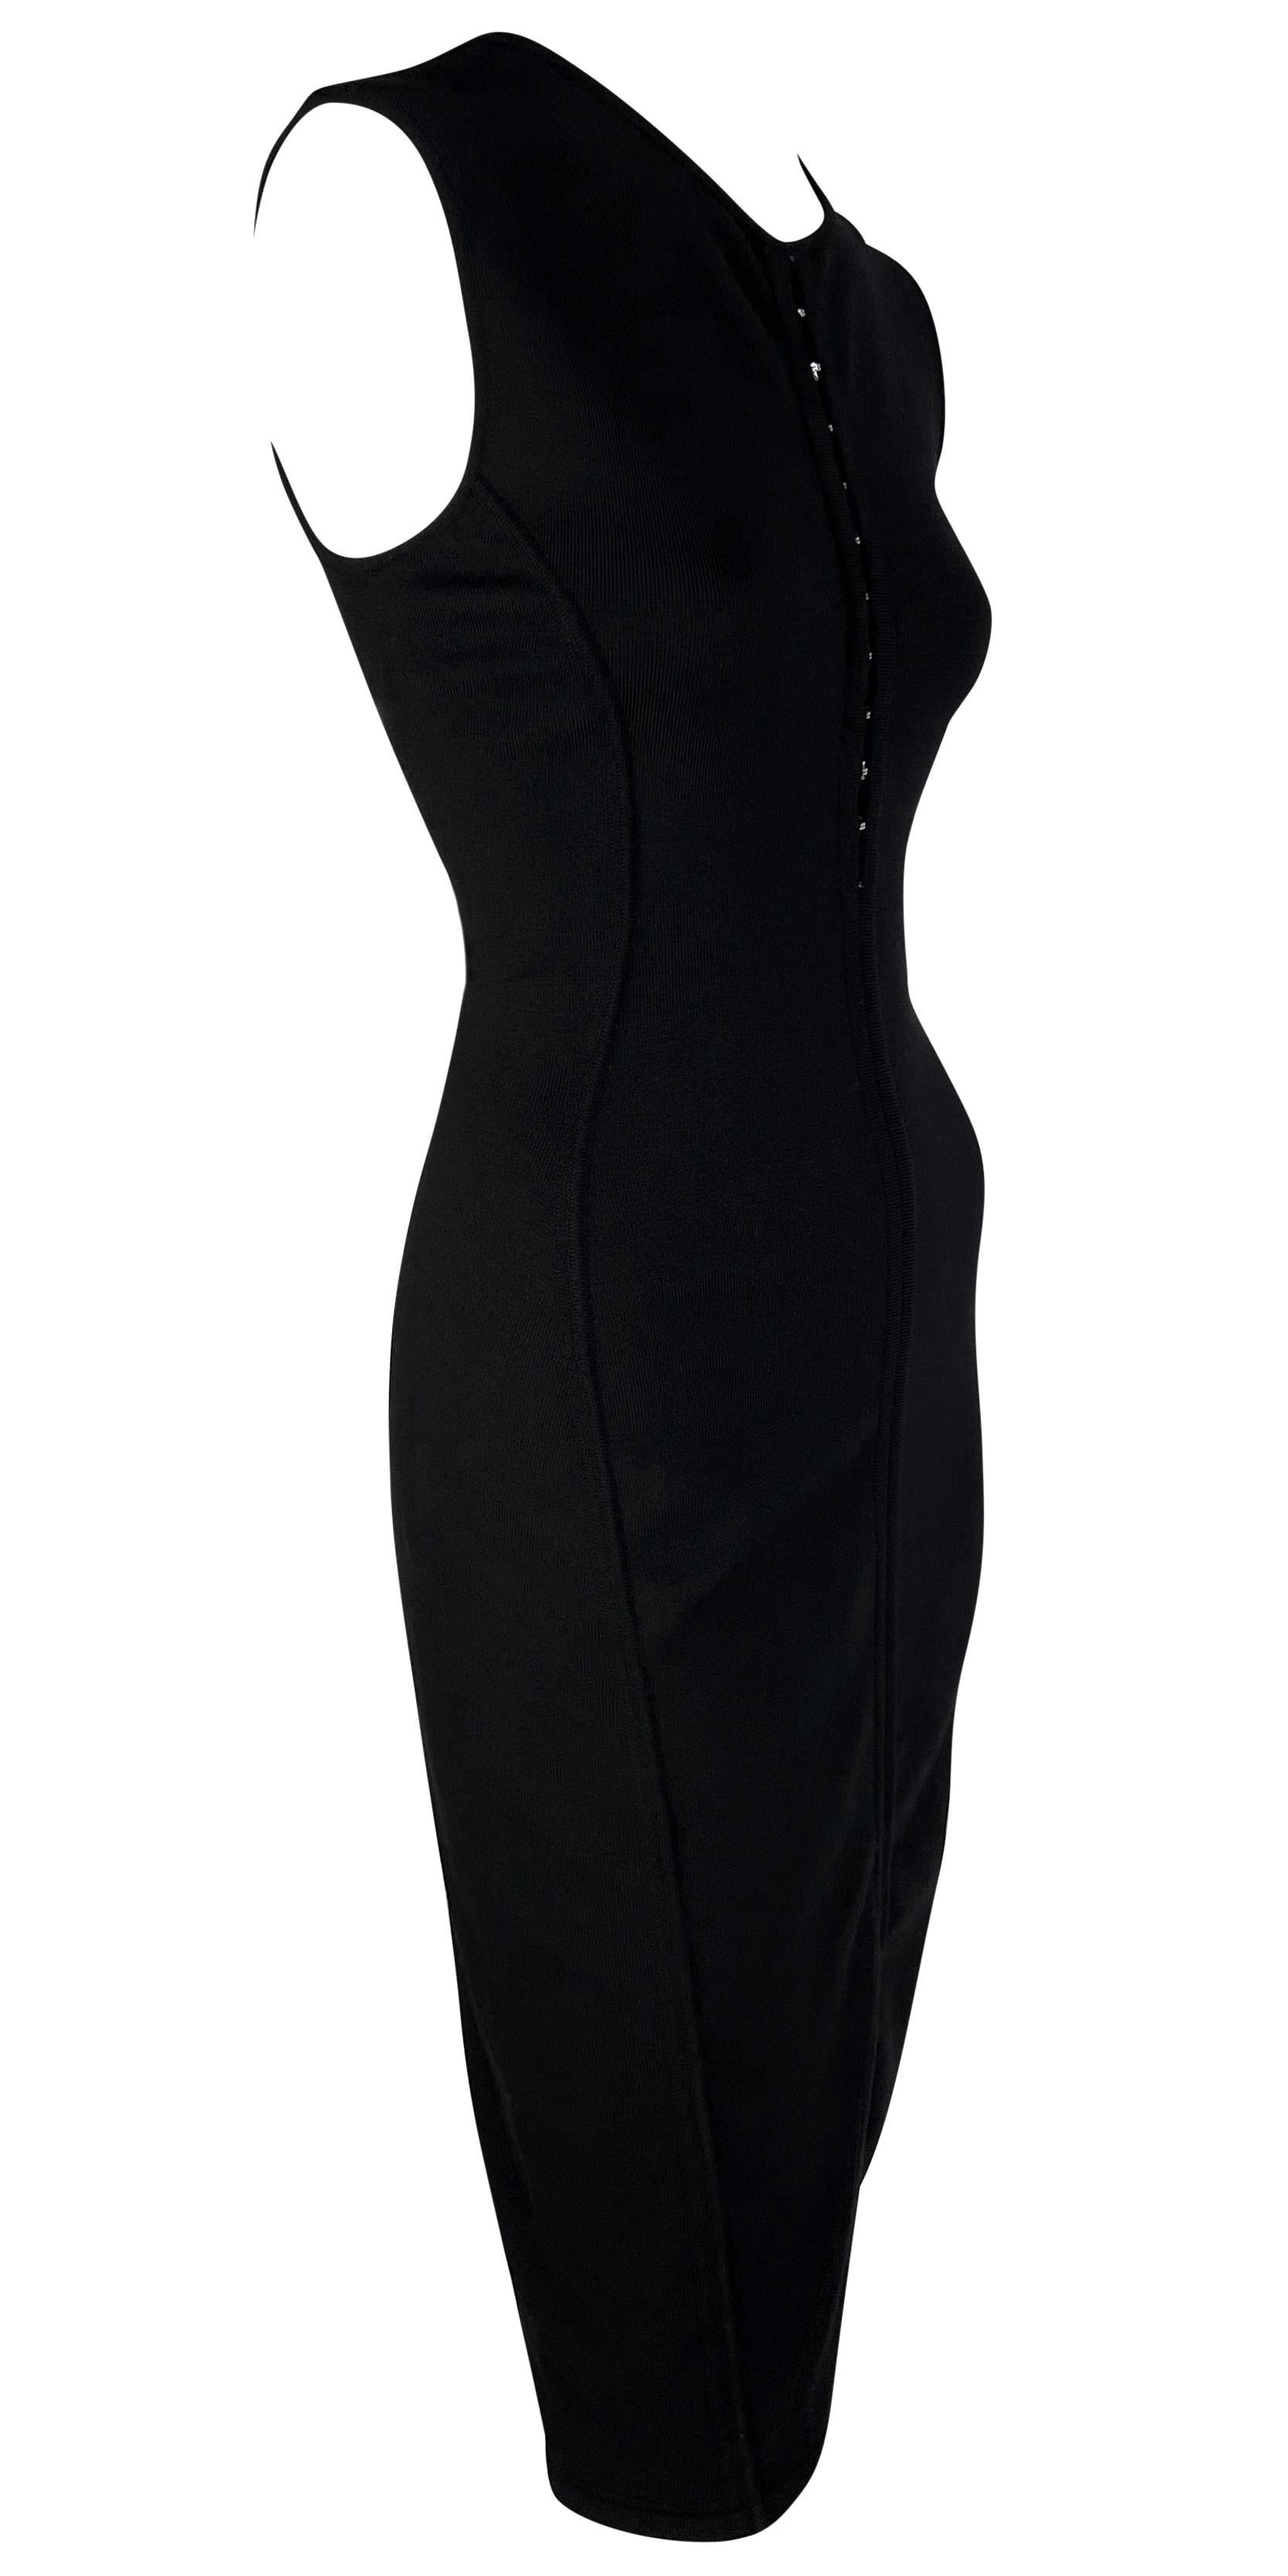 S/S 2002 Gianni Versace by Donatella Black Bodycon Hook Eye Plunging Knit Dress For Sale 2